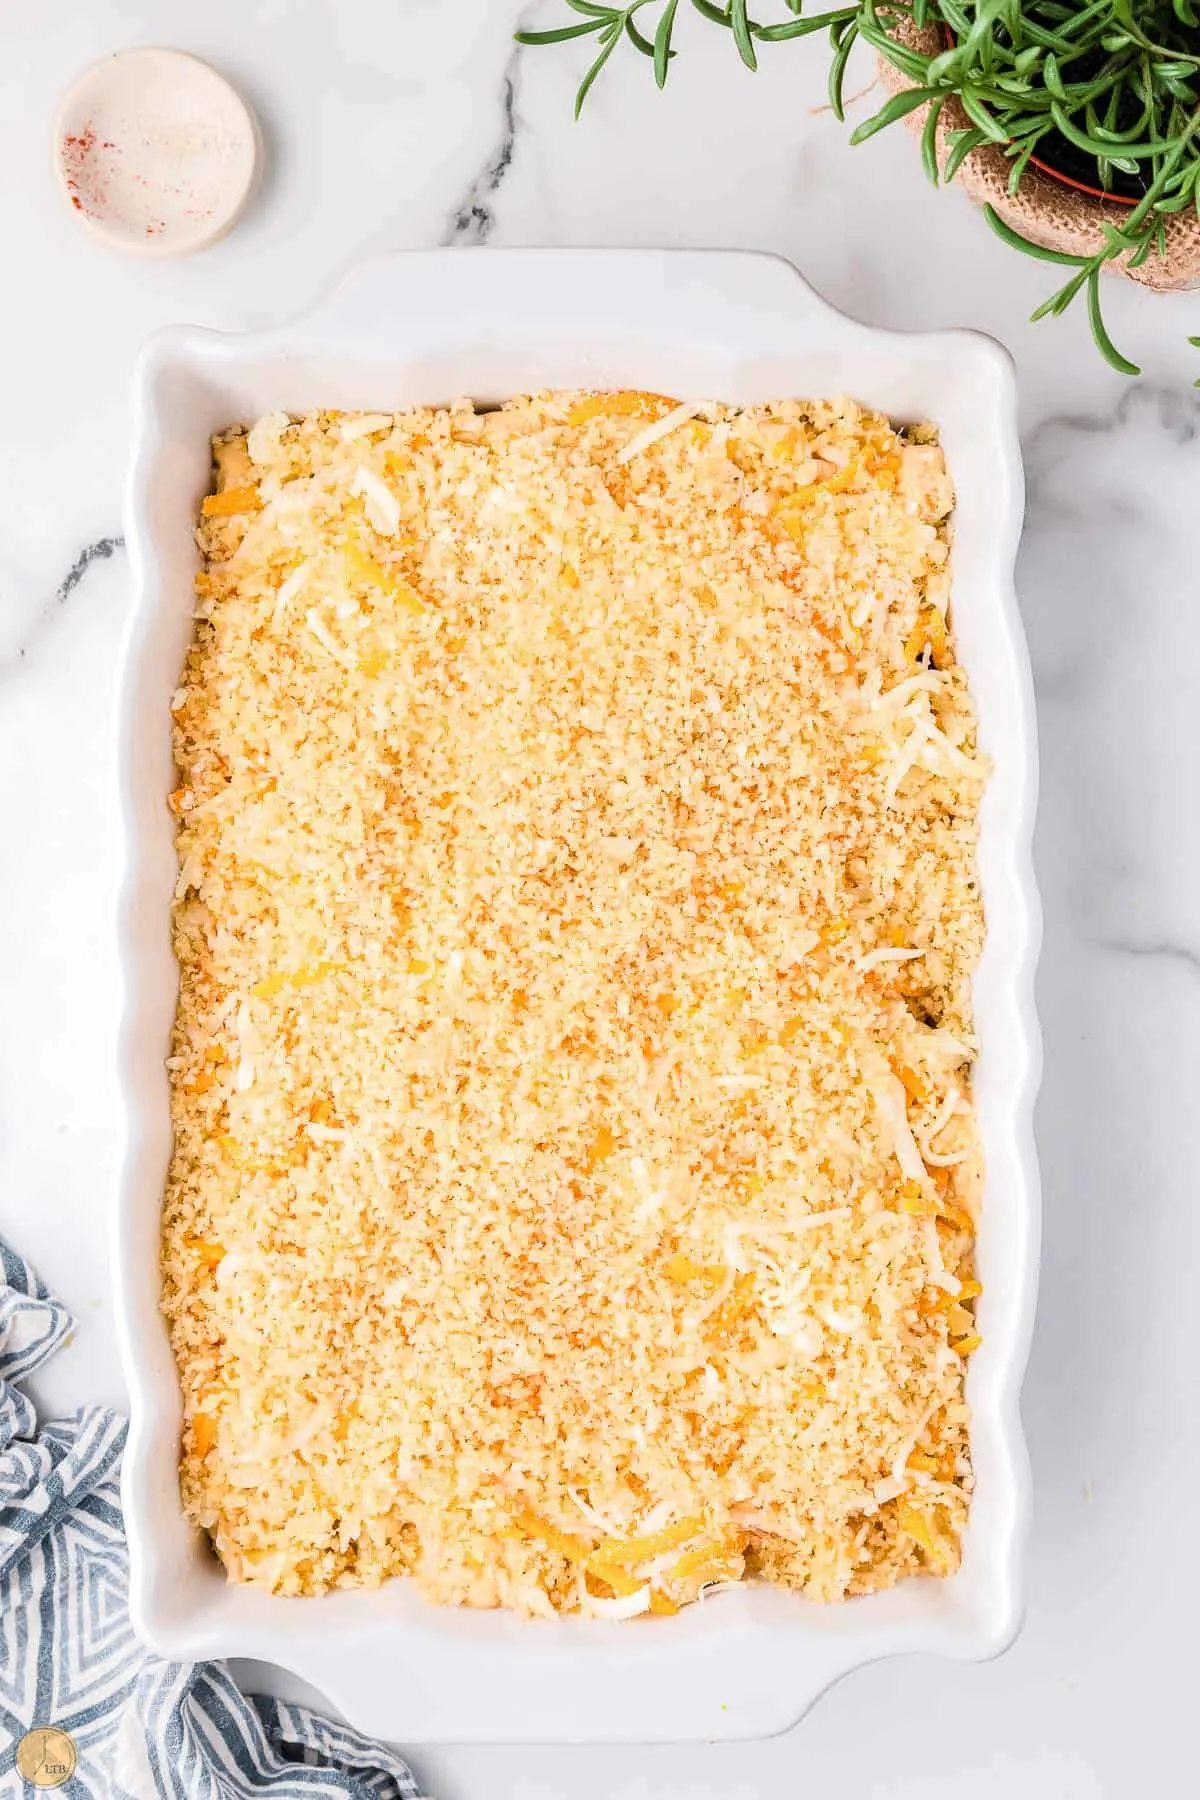 breadcrumbs and shredded cheese on top of casserole in a white dish